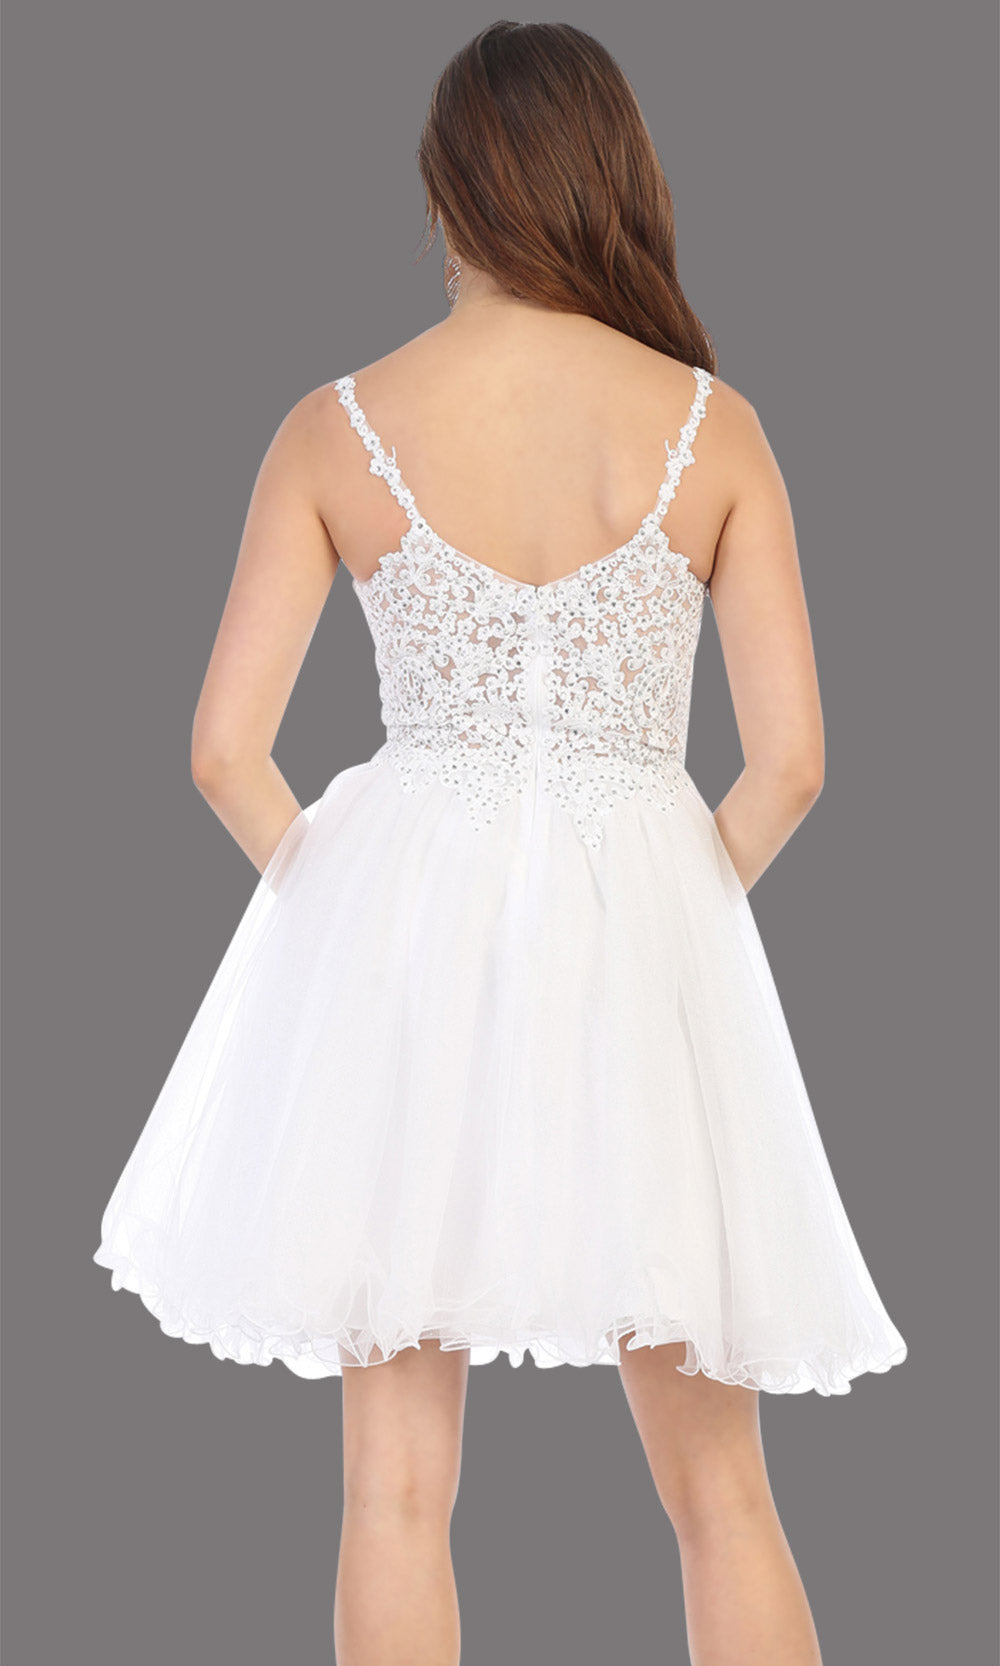 Mayqueen Mq1693 short white flowy v neck beaded sequin grade 8 graduation dress w/straps & puffy skirt. This white party dress is perfect for prom, graduation, grade 8 grad, confirmation dress, bat mitzvah dress, damas. Plus sizes avail-back.jpg